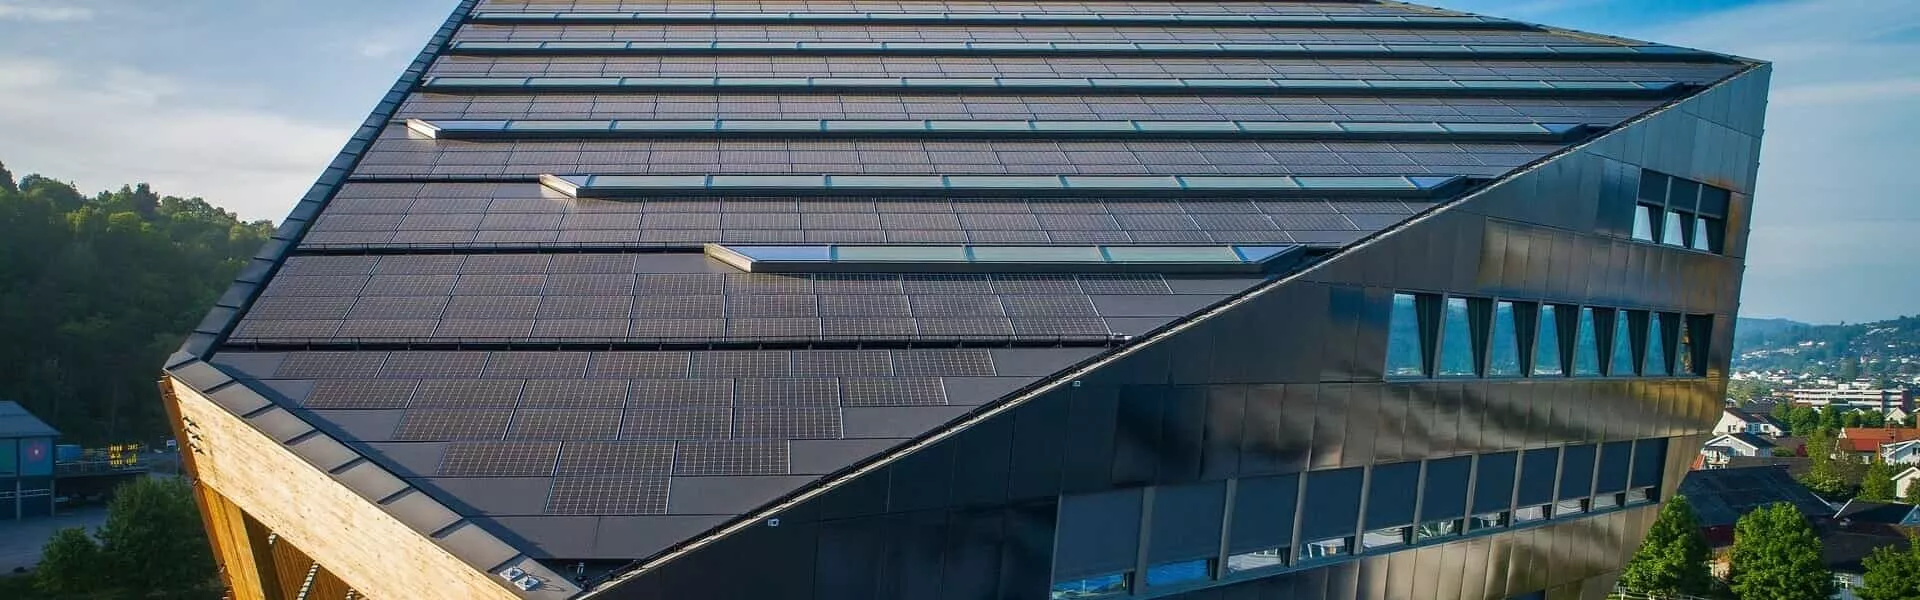 The new project by Maxeon Solar Technologies is an achievement in energy-positive buildings’ construction that helps set a standard to decarbonize the whole industry. 